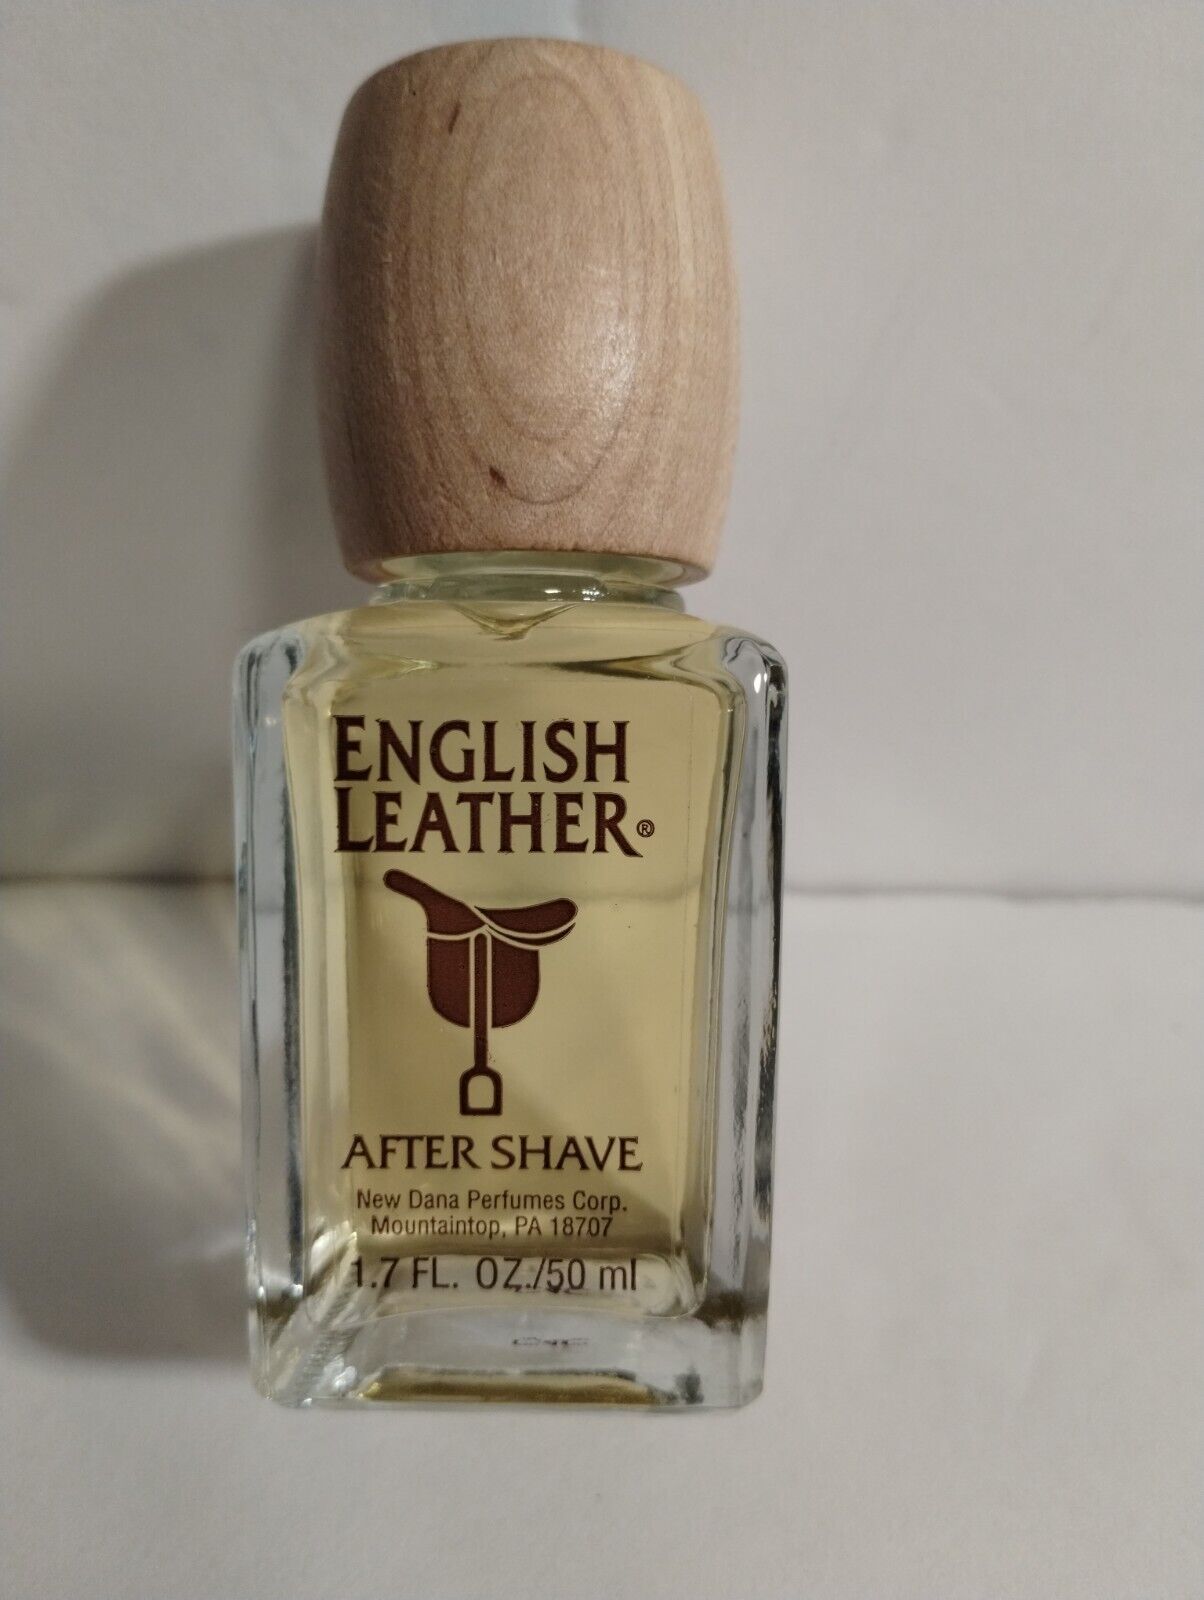 ENGLISH LEATHER After Shave  1.7 Oz. bottle pre-owned unused